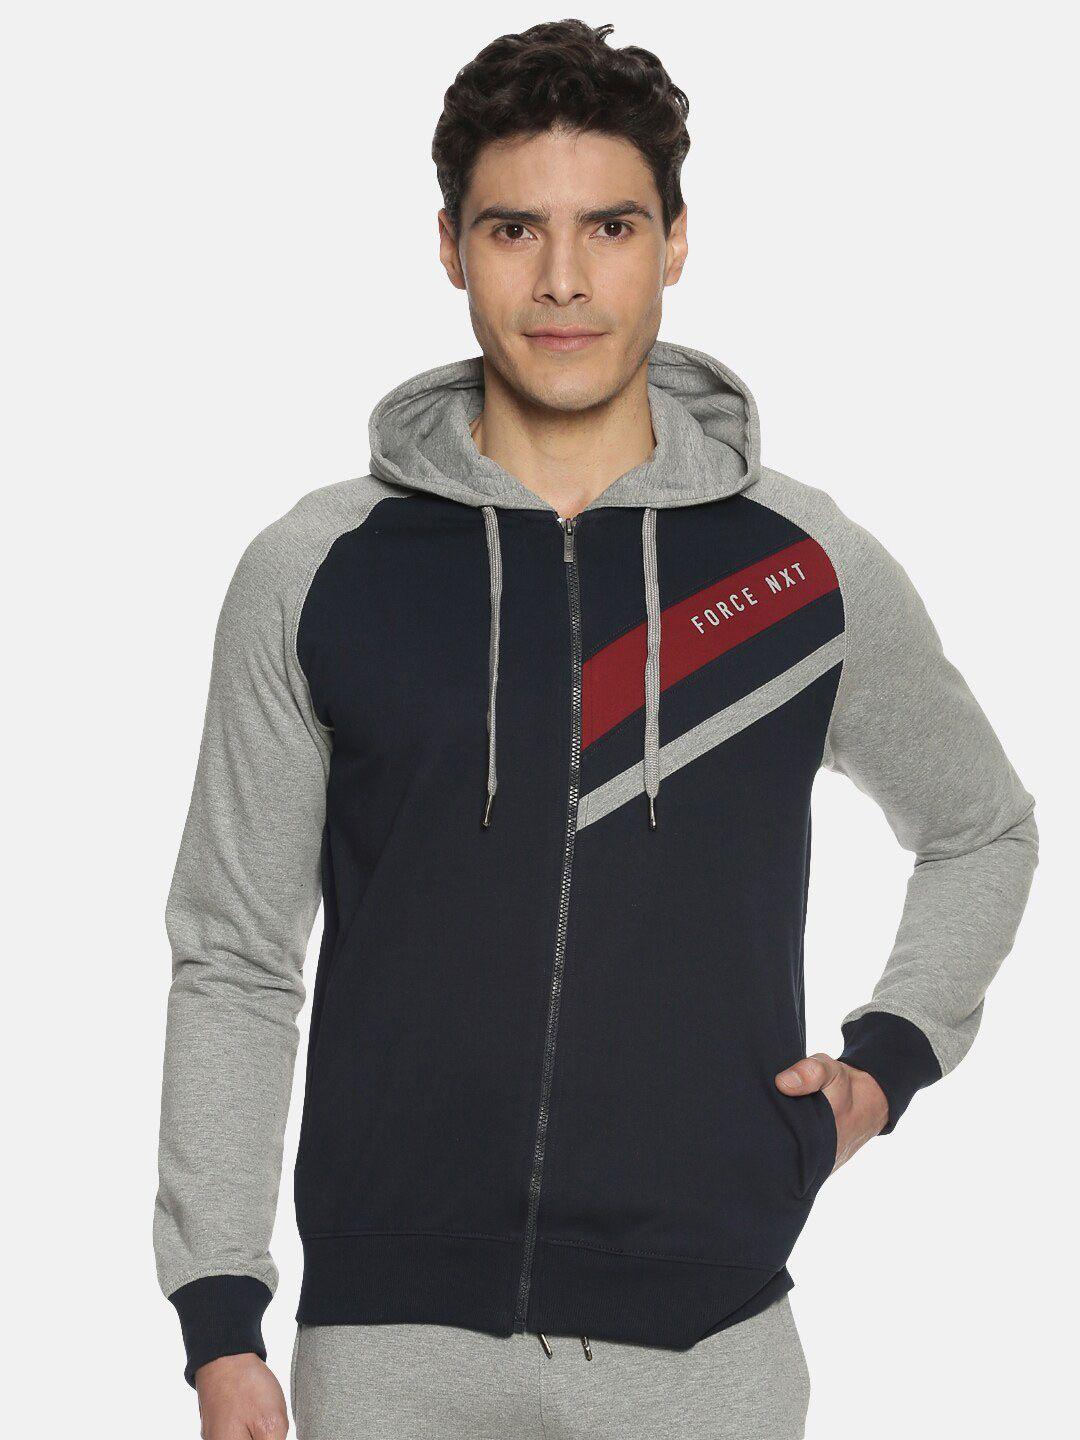 force-nxt-printed-hooded-cotton-front-open-sweatshirt